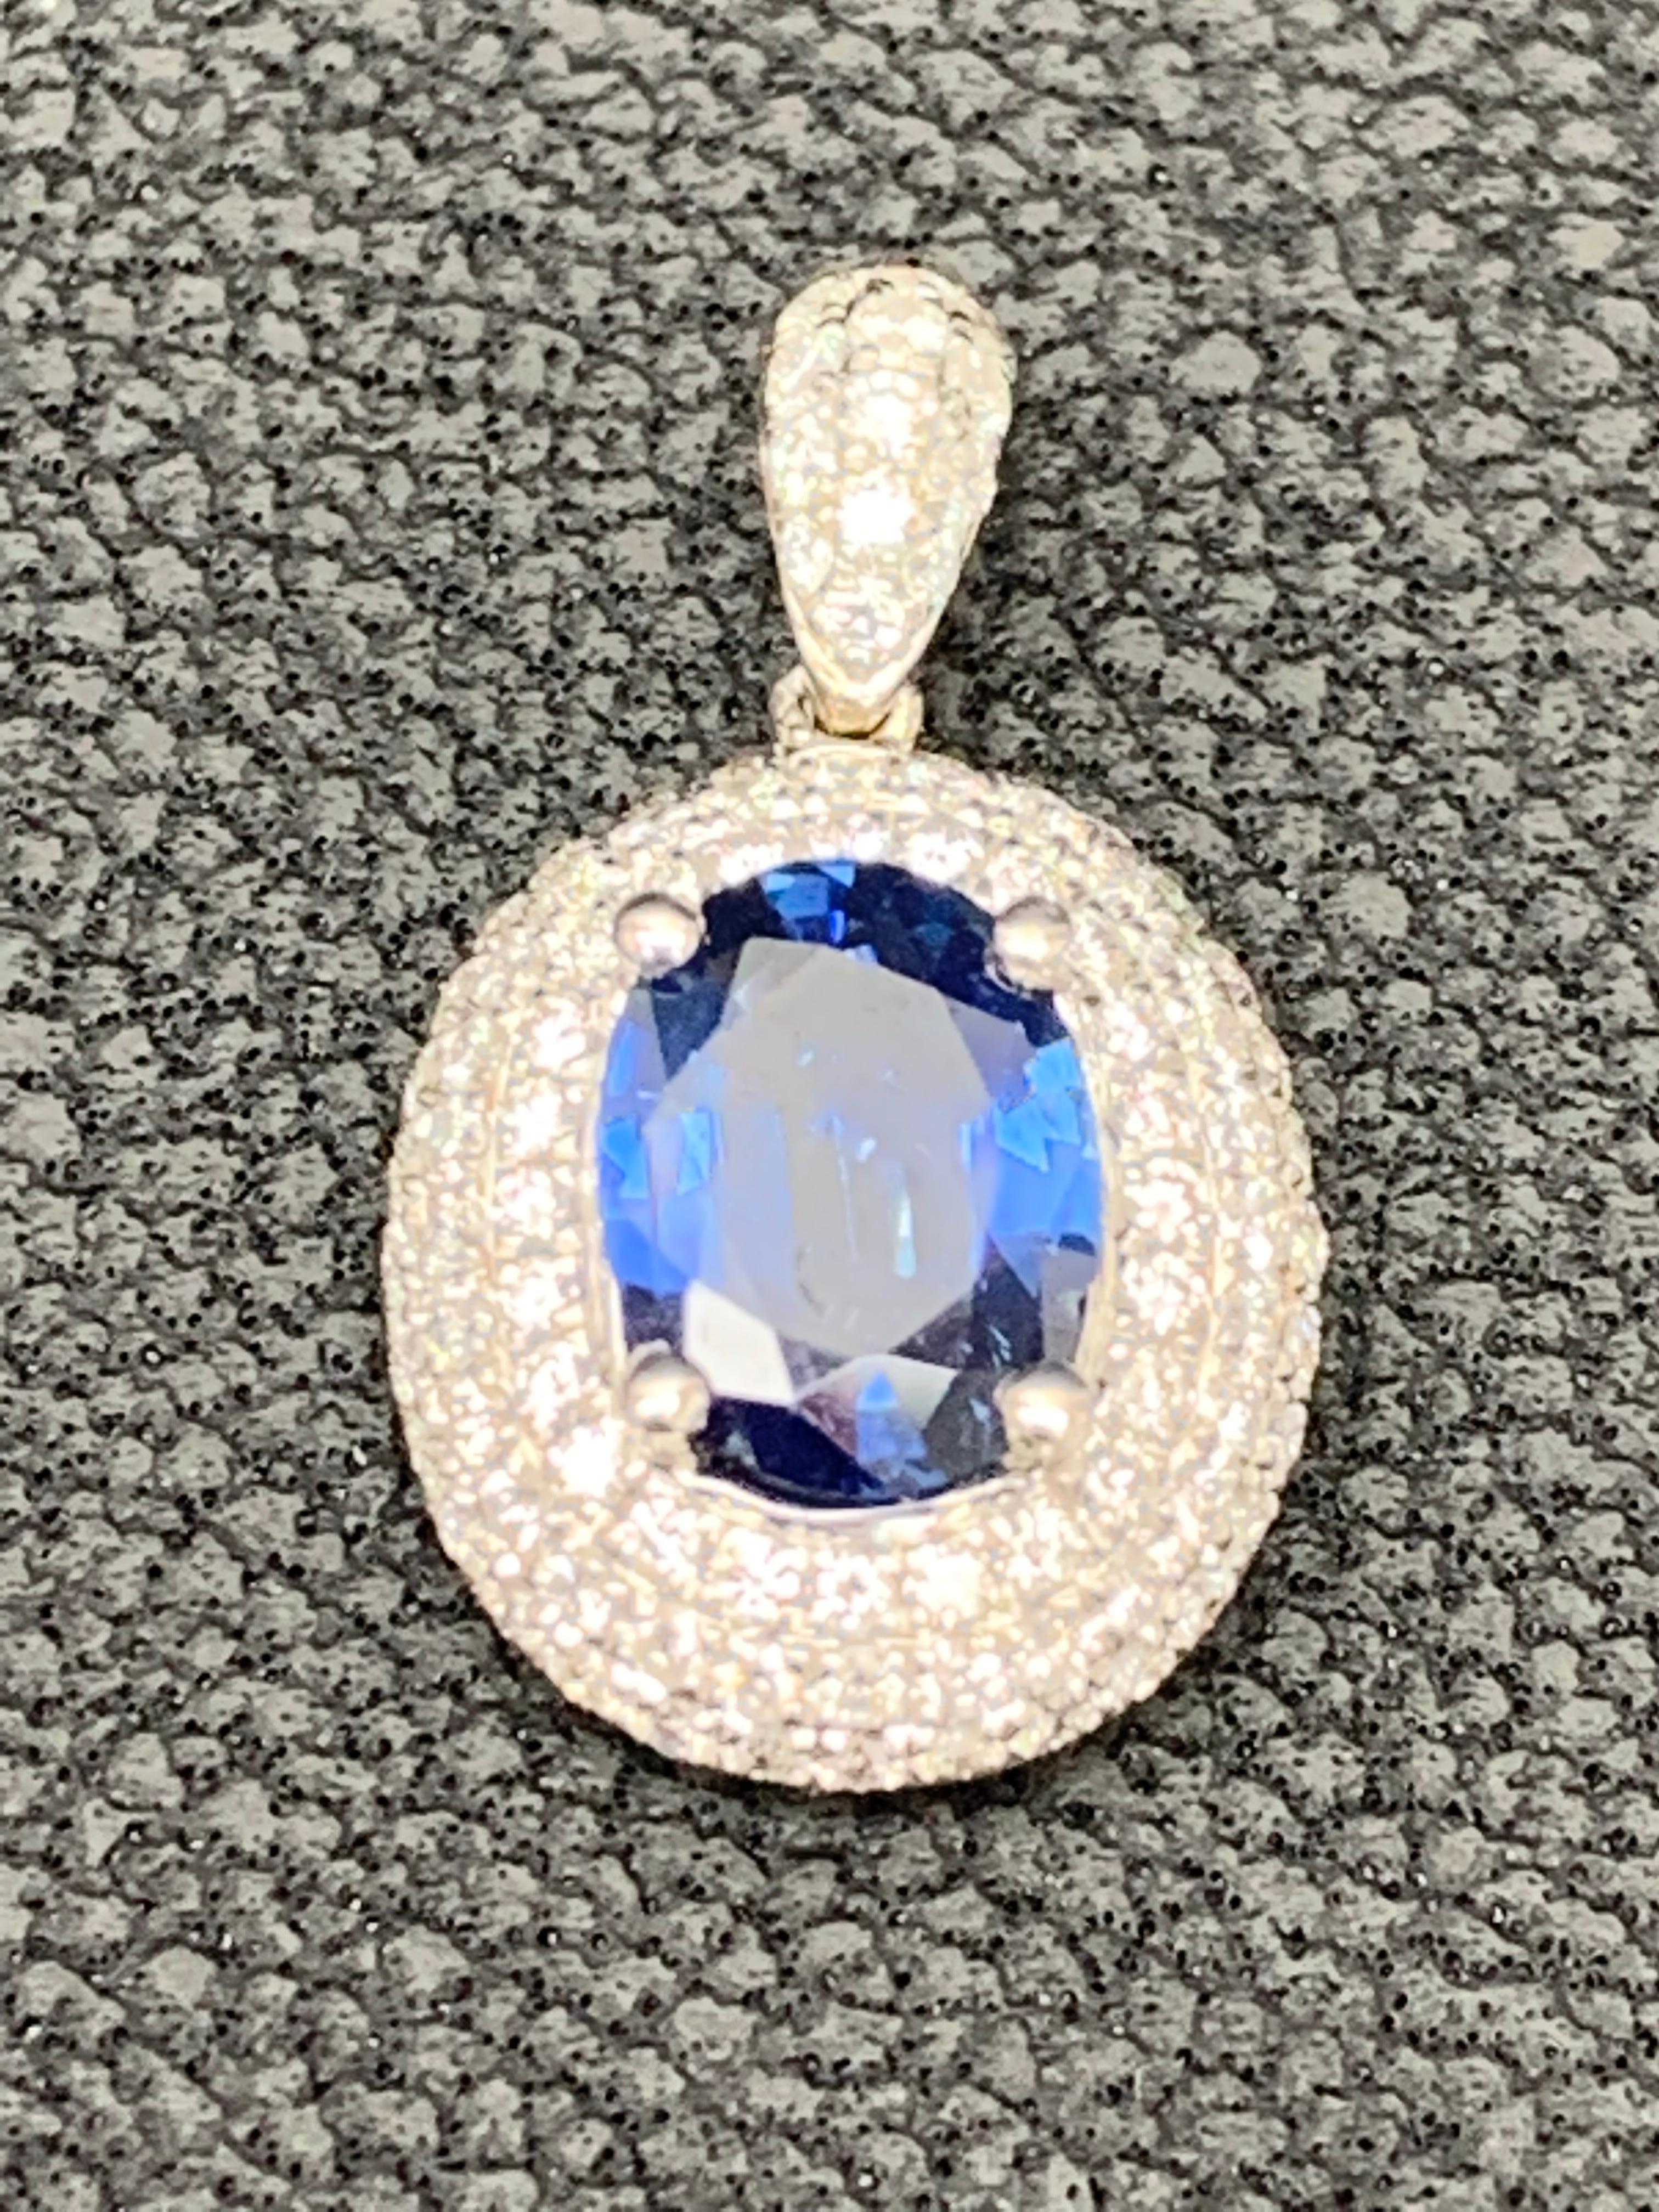 A simple and timeless piece of jewelry showcasing a 1.00 carat oval cut blue sapphire, set in a brilliant diamond halo made in 18k white gold. Diamonds weigh 0.48 carats total. 18